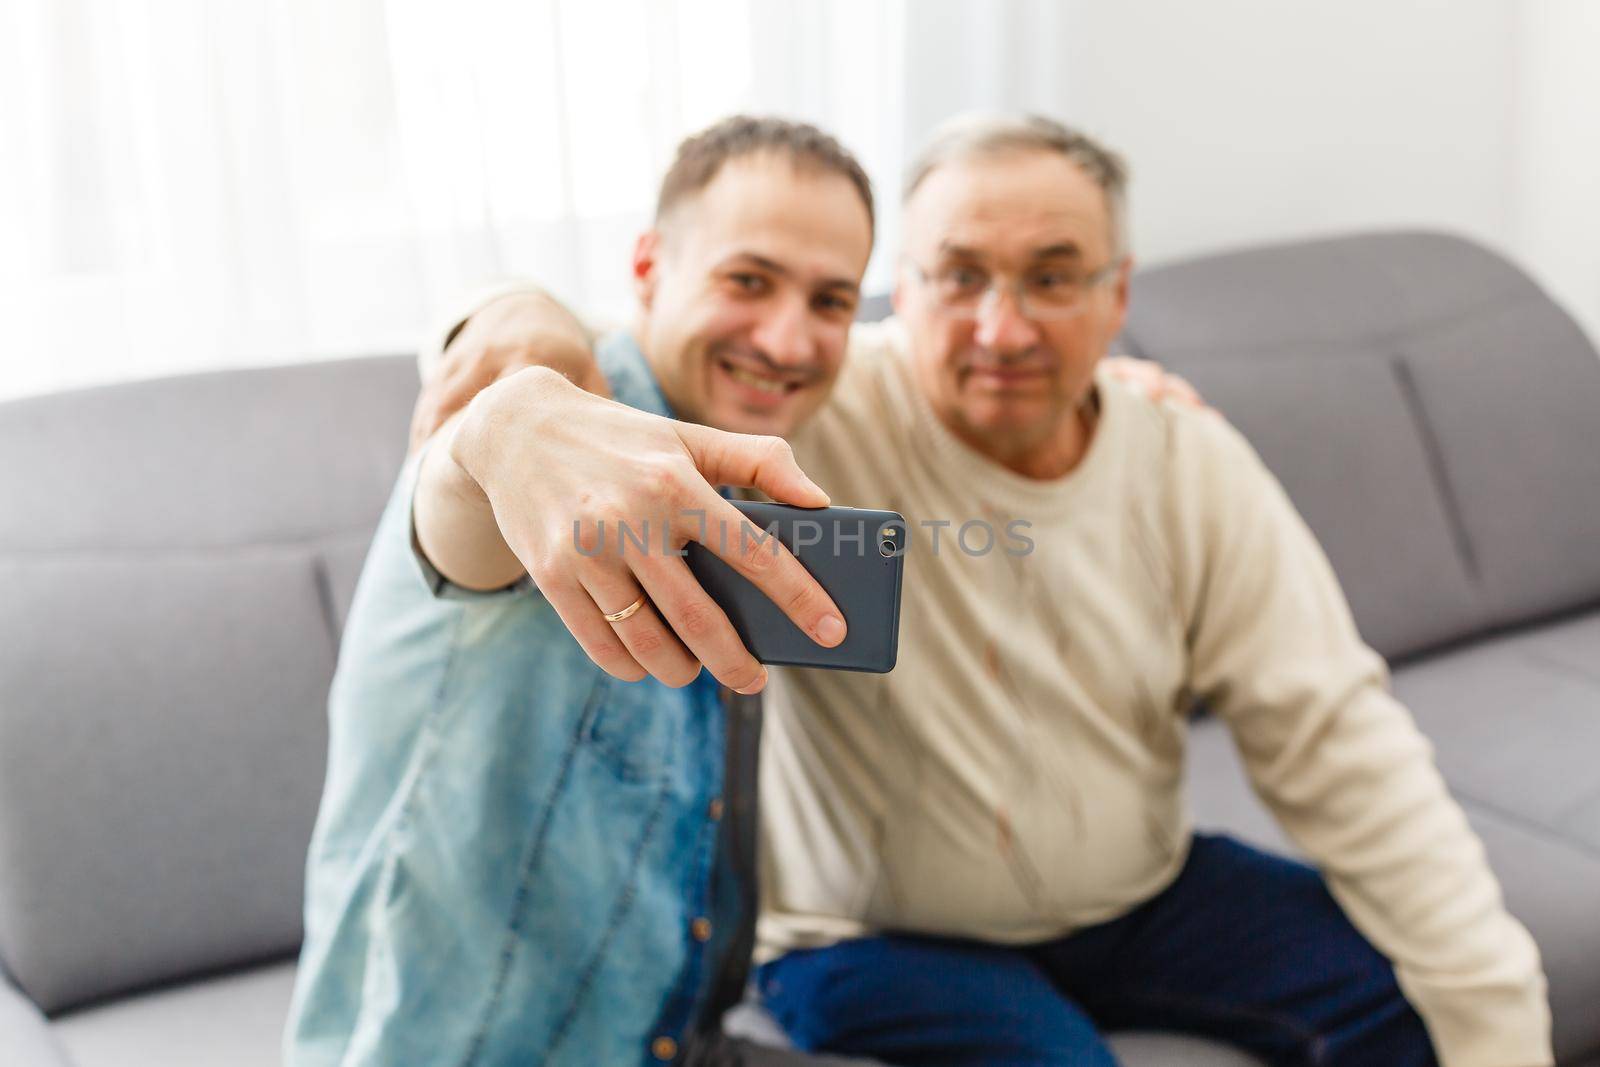 Happy moment. Cheerful young man taking a selfie with his upbeat elderly father waving at the camera and smiling pleasantly by Andelov13